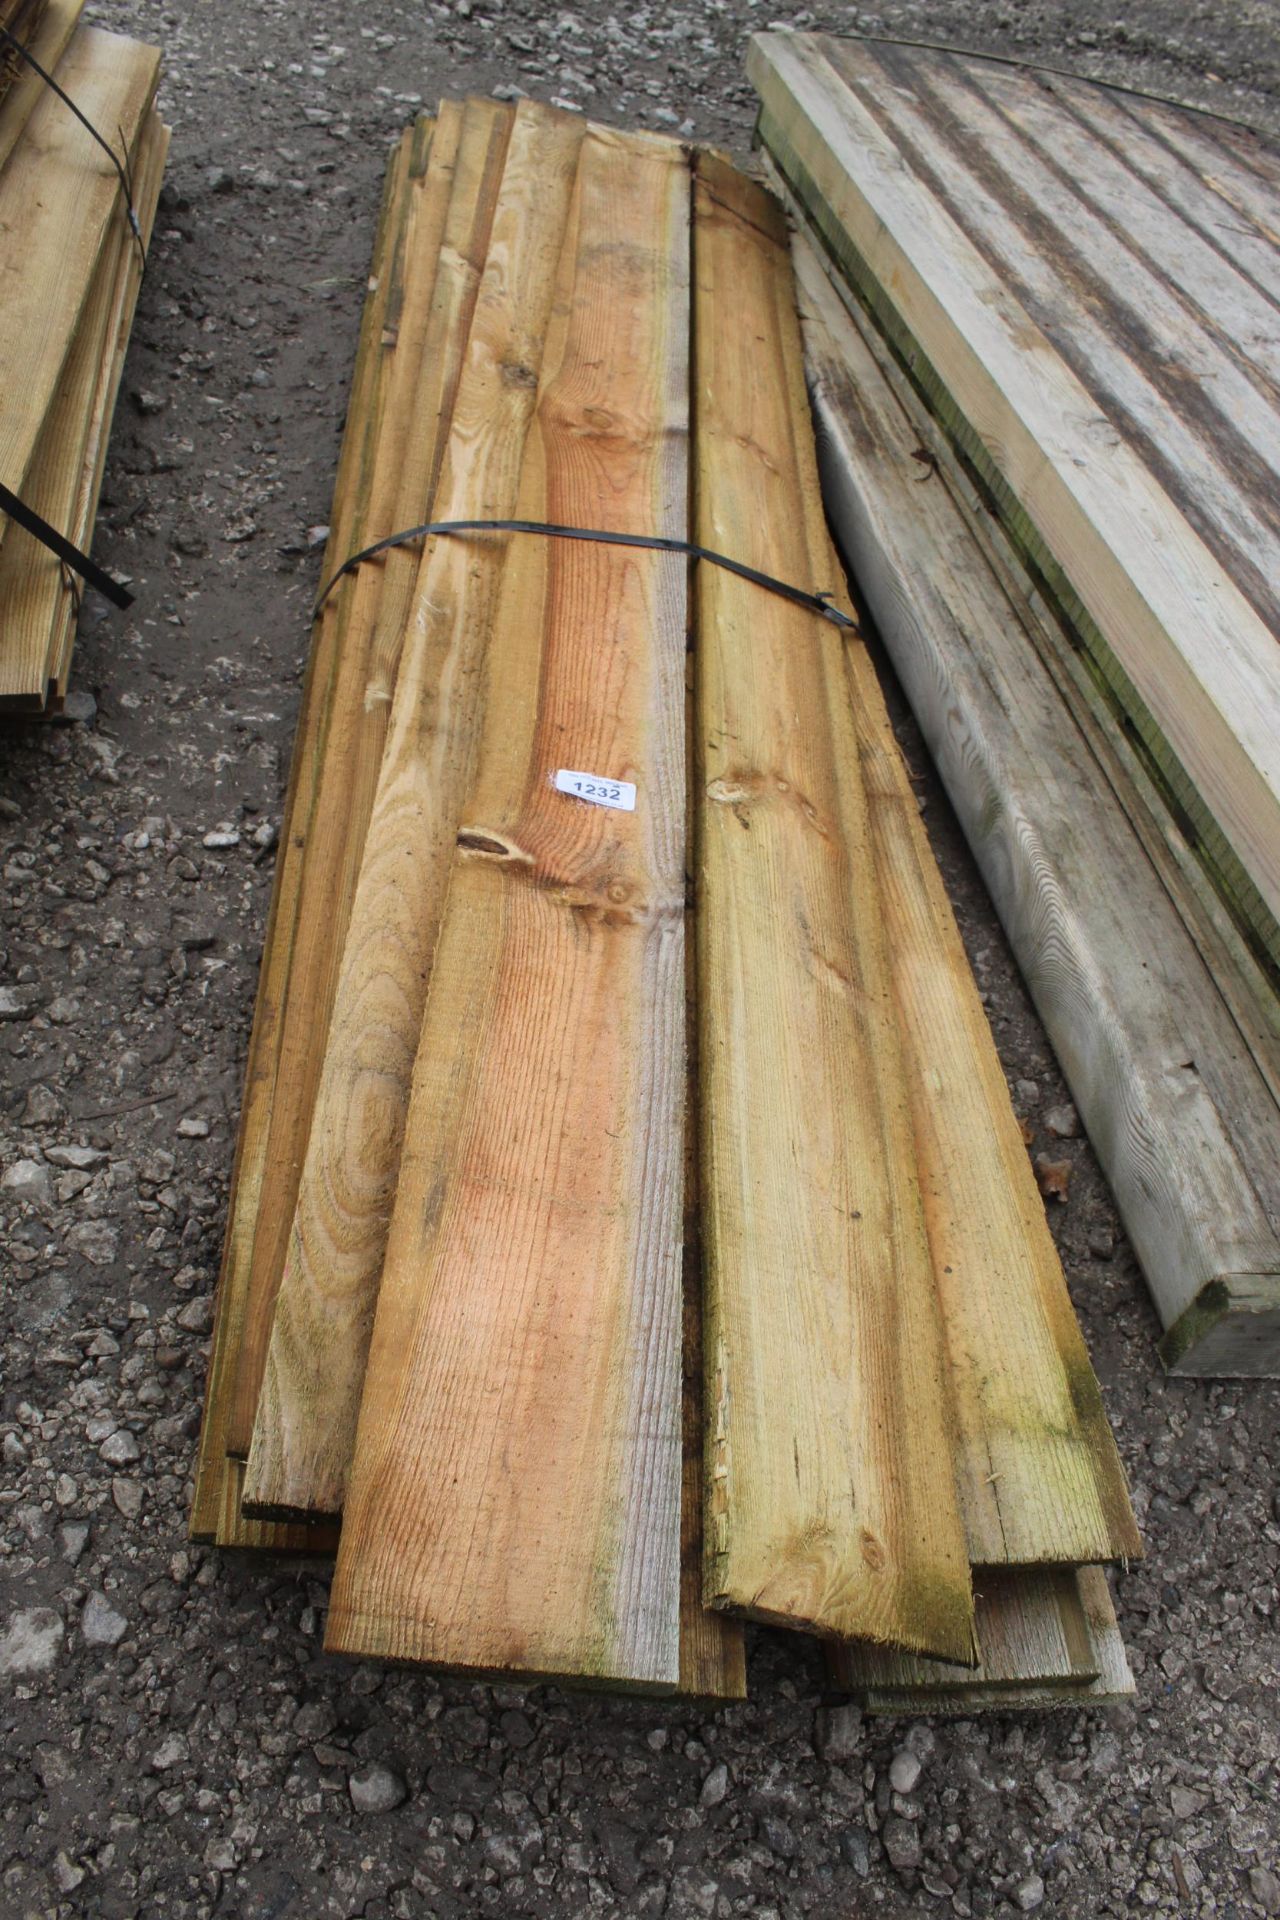 APPROX. 20 FEATHER EDGE BOARDS 6'1" + VAT